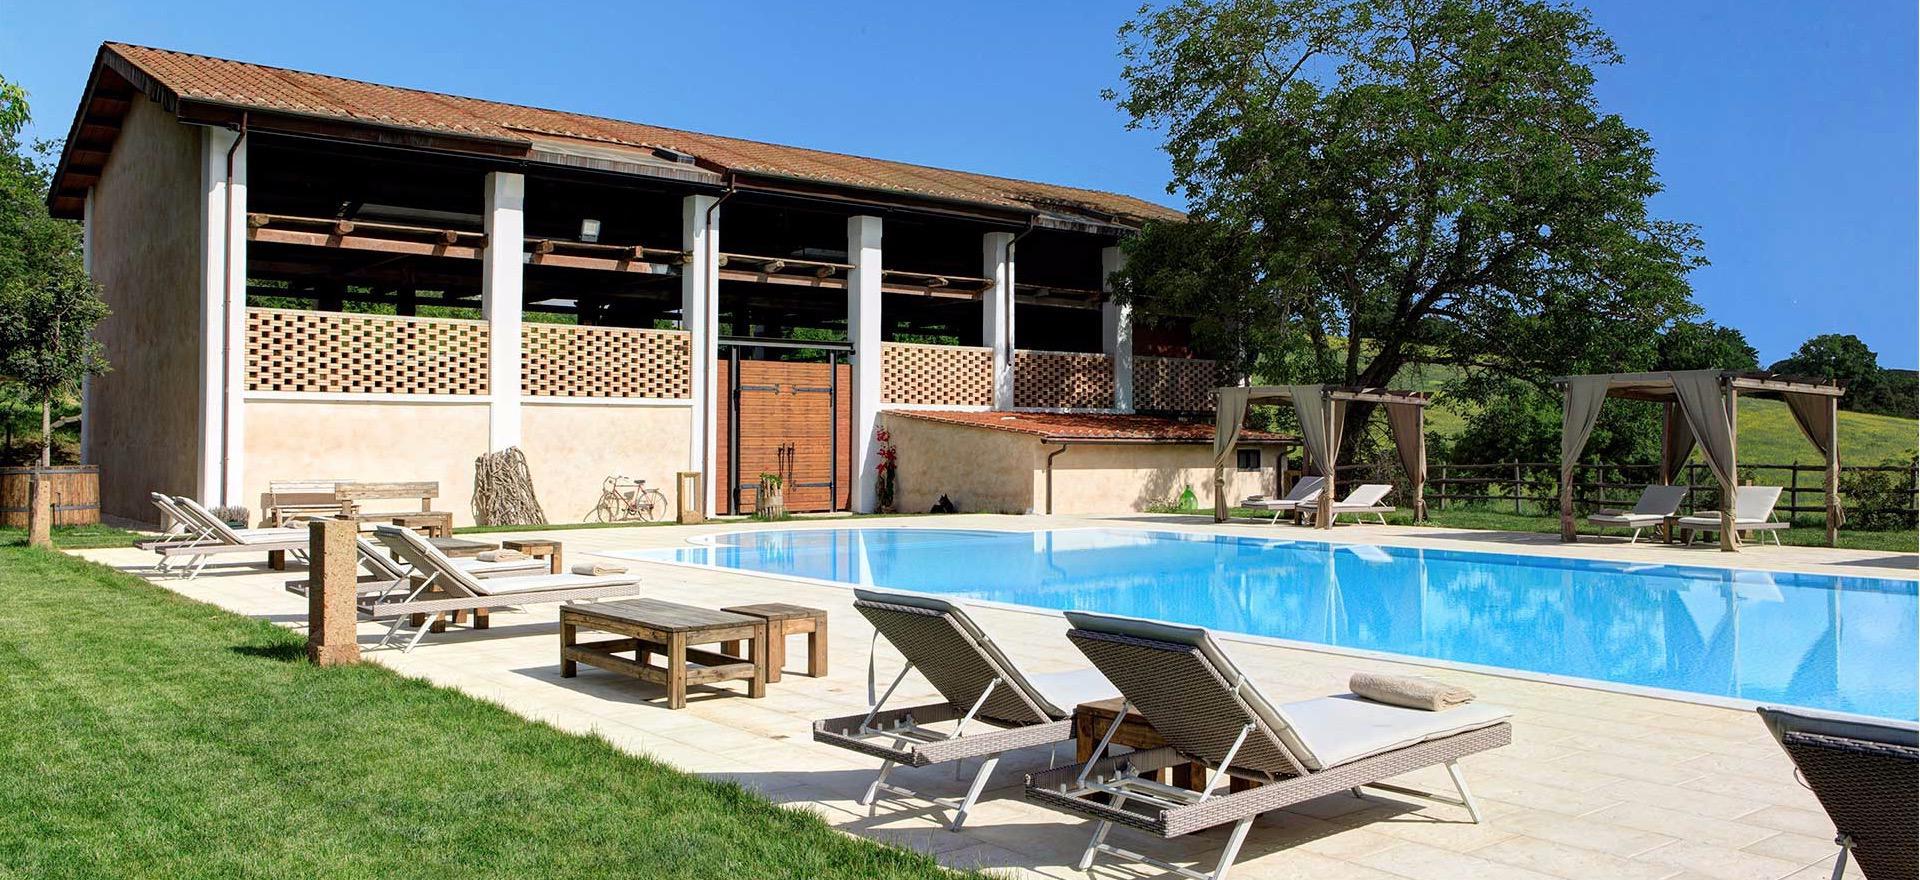 Agriturismo Rome Luxury agriturismo near Rome with restaurant and swimming pool